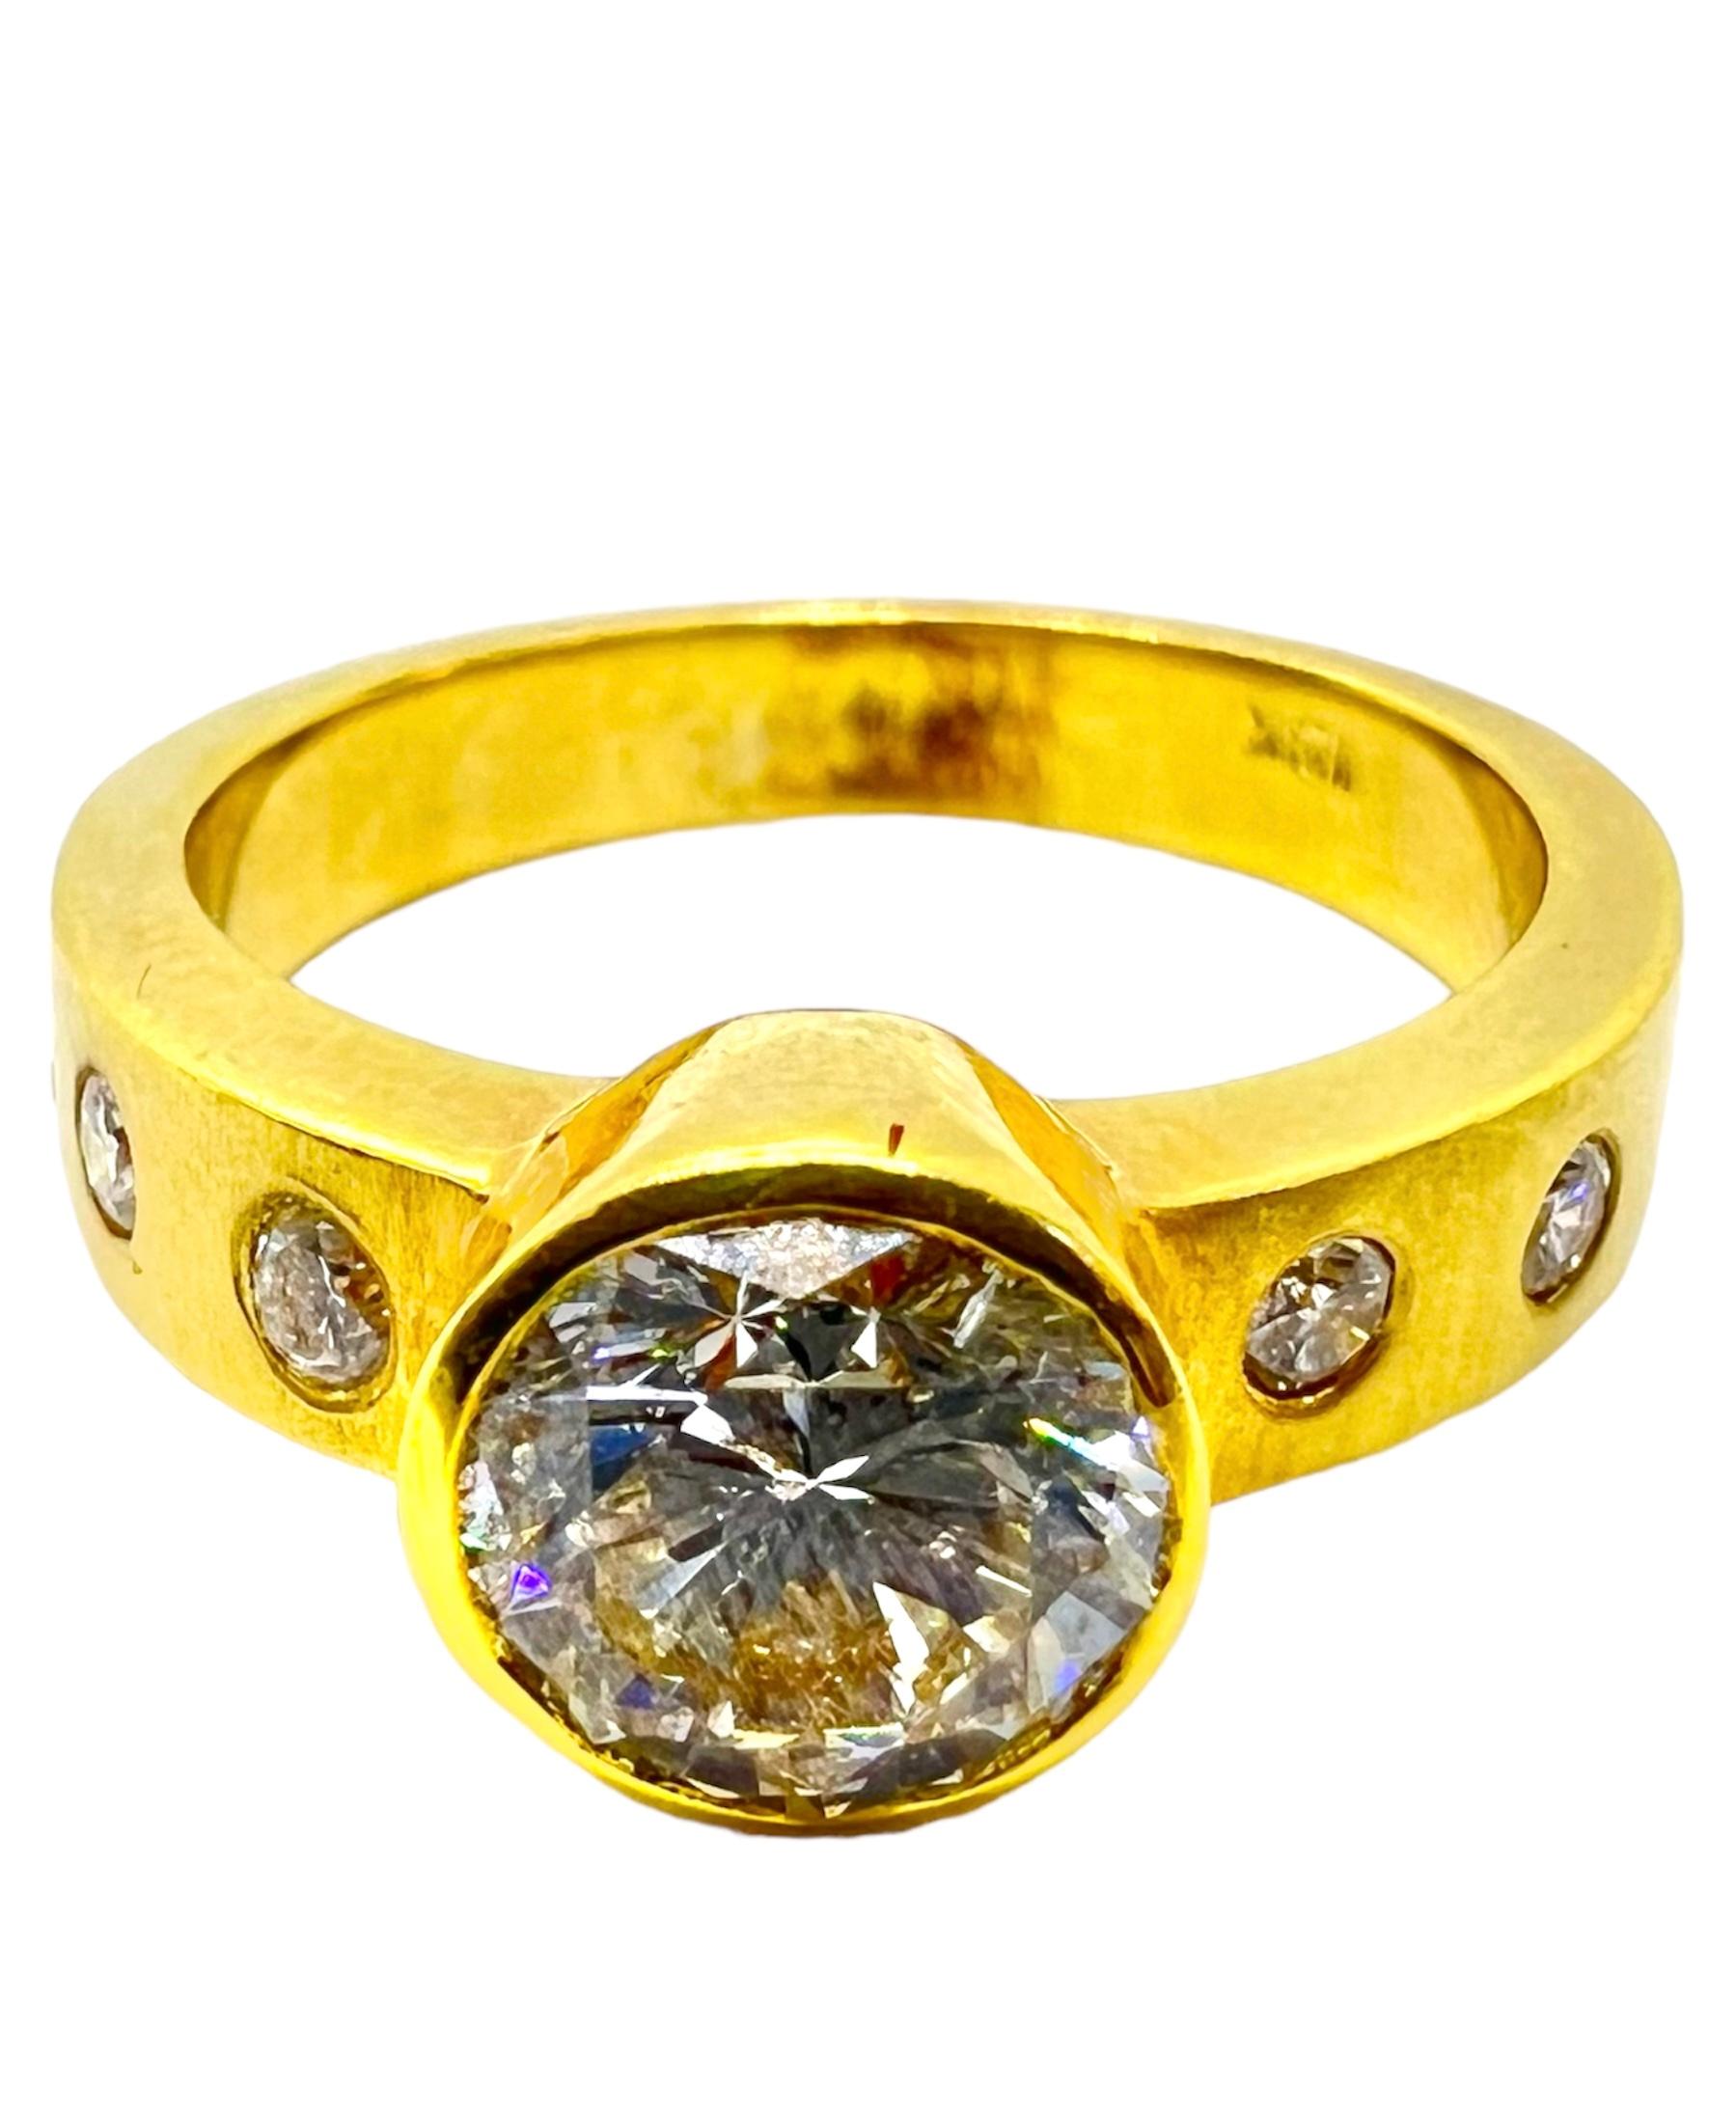 18K yellow gold ring with round diamond center stone accentuated with small diamonds.

Sophia D by Joseph Dardashti LTD has been known worldwide for 35 years and are inspired by classic Art Deco design that merges with modern manufacturing